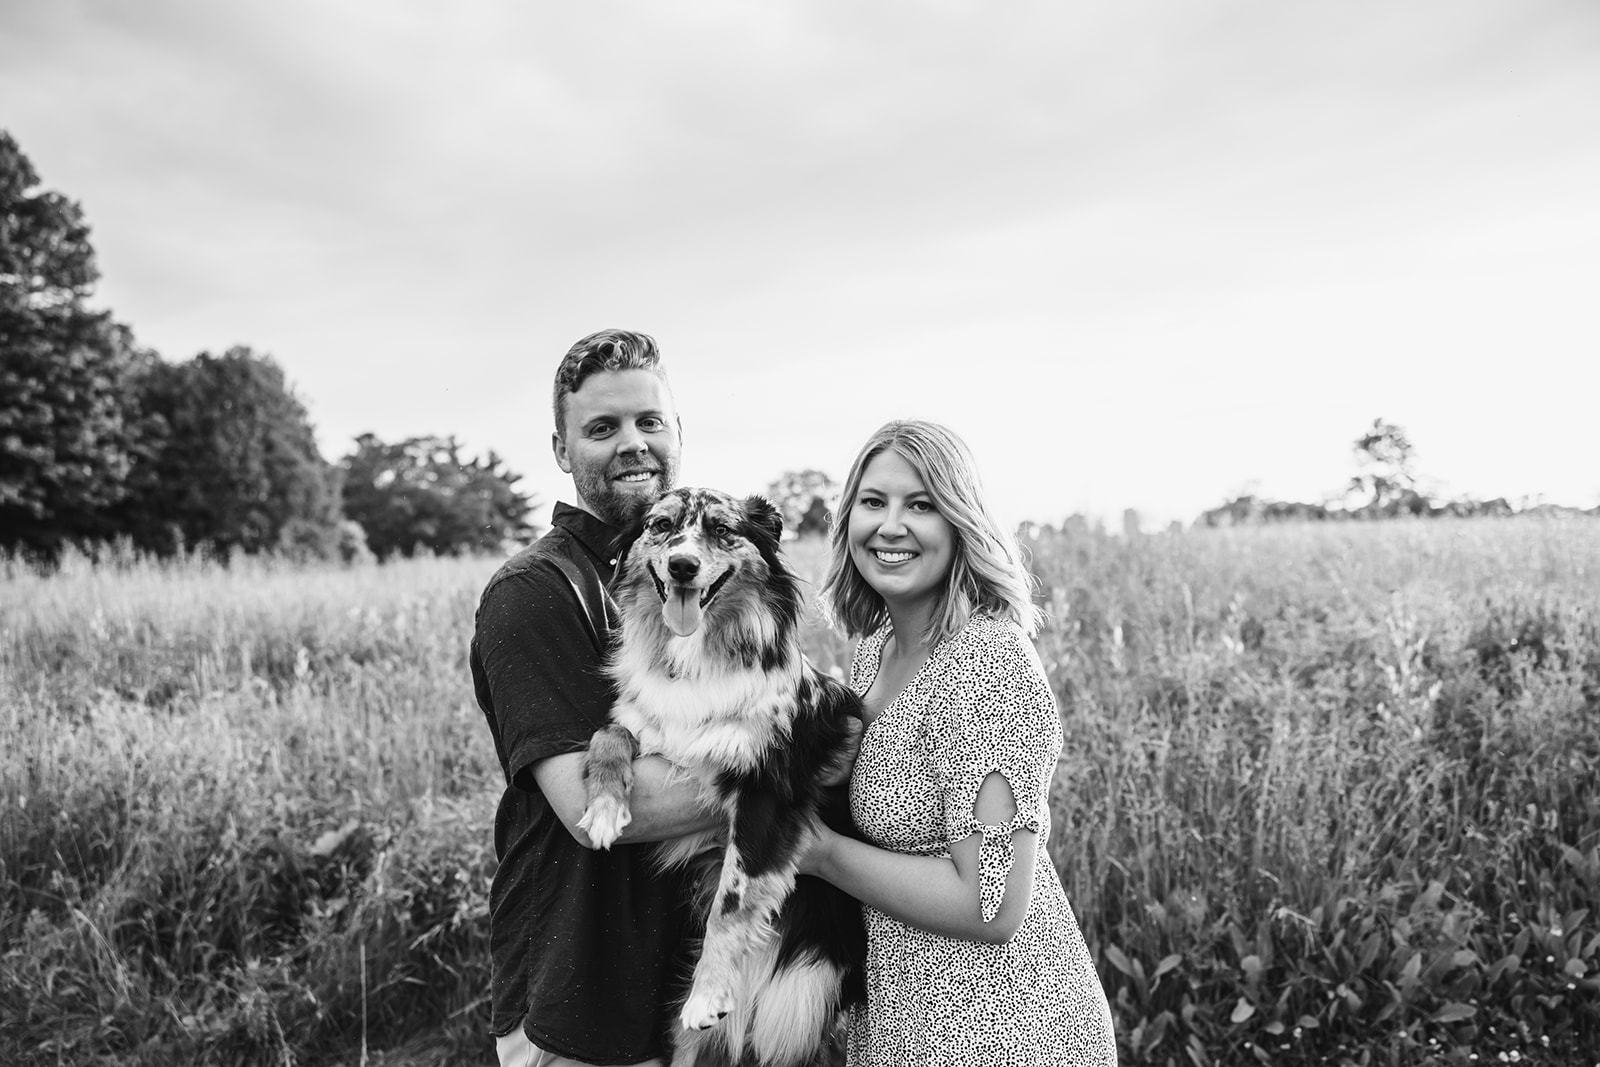 Field engagement session captures the couple's natural chemistry